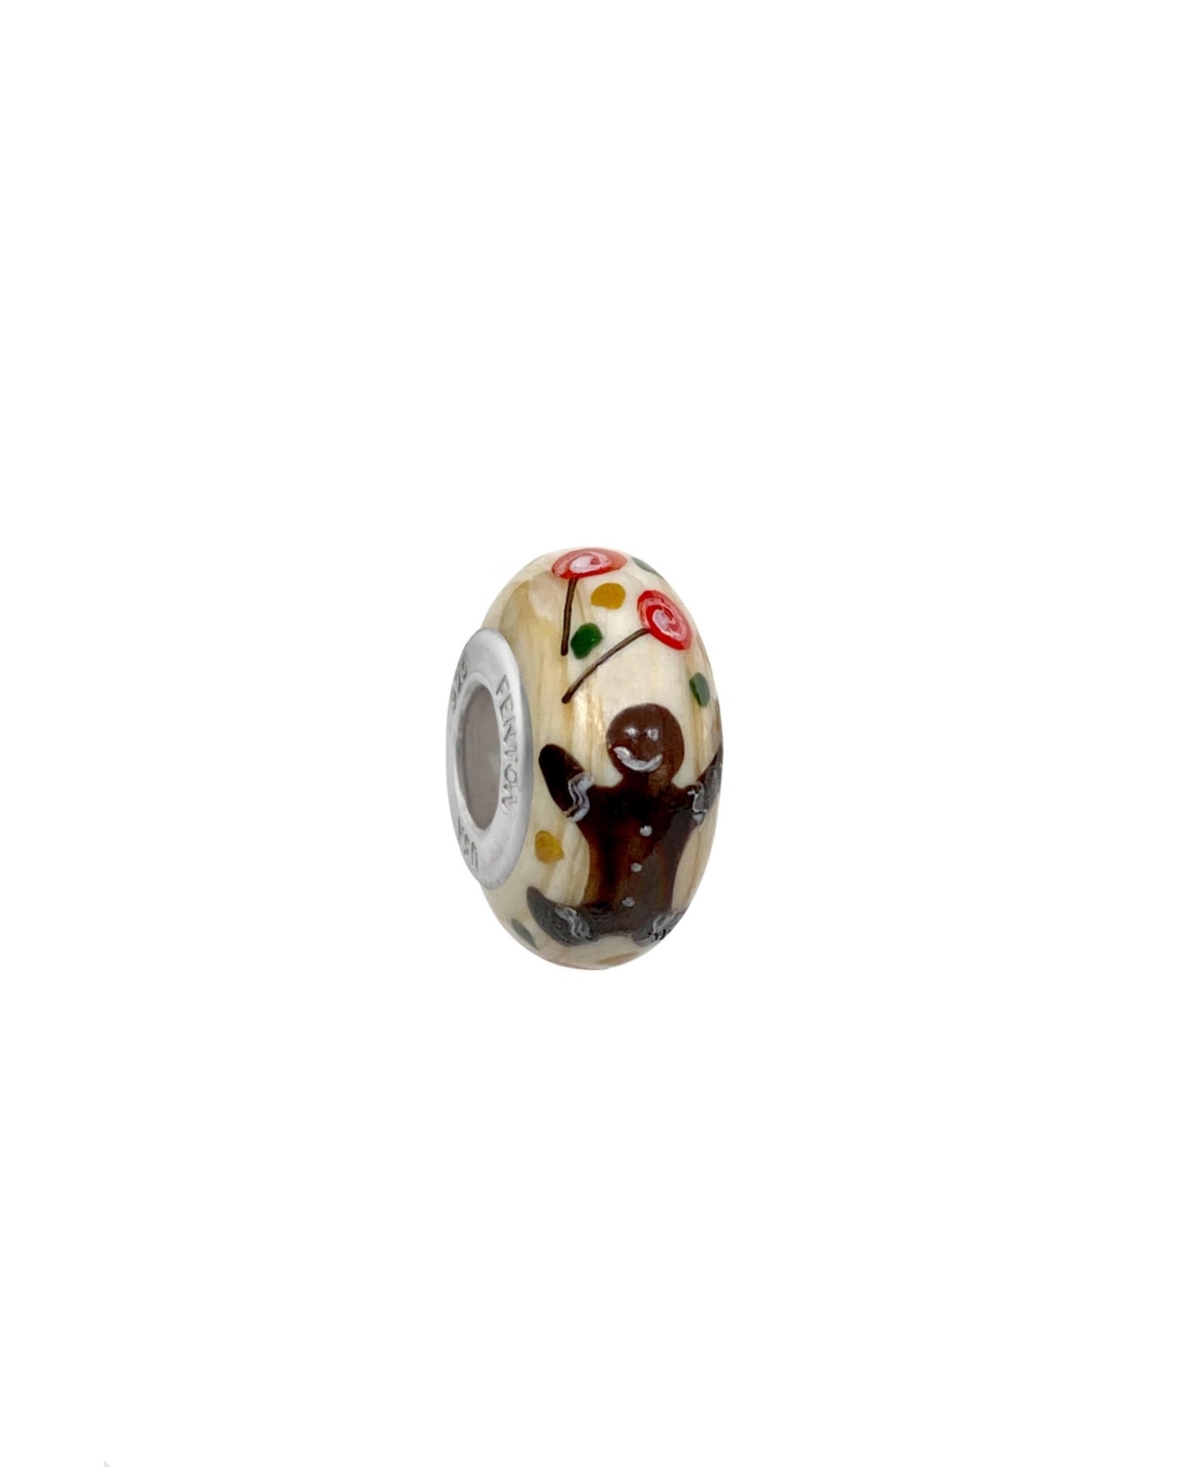 Glass Jewelry: Sweetest Dreams Glass Charm - Multi-color